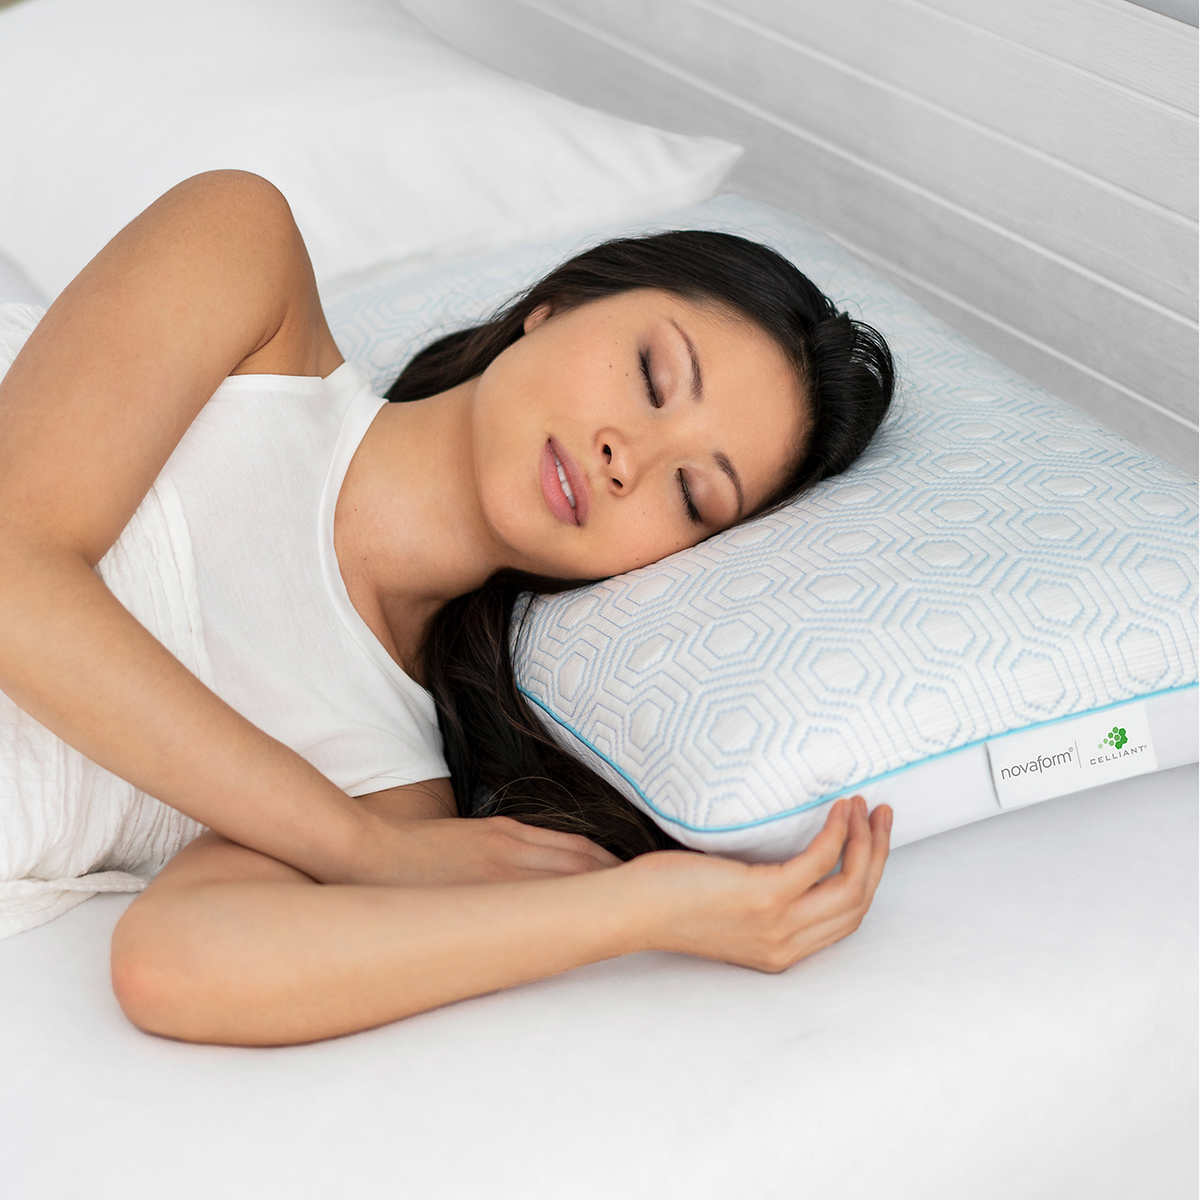 Novaform Overnight Recovery Gel Memory Foam Pillow With Cooling Celliant Cover